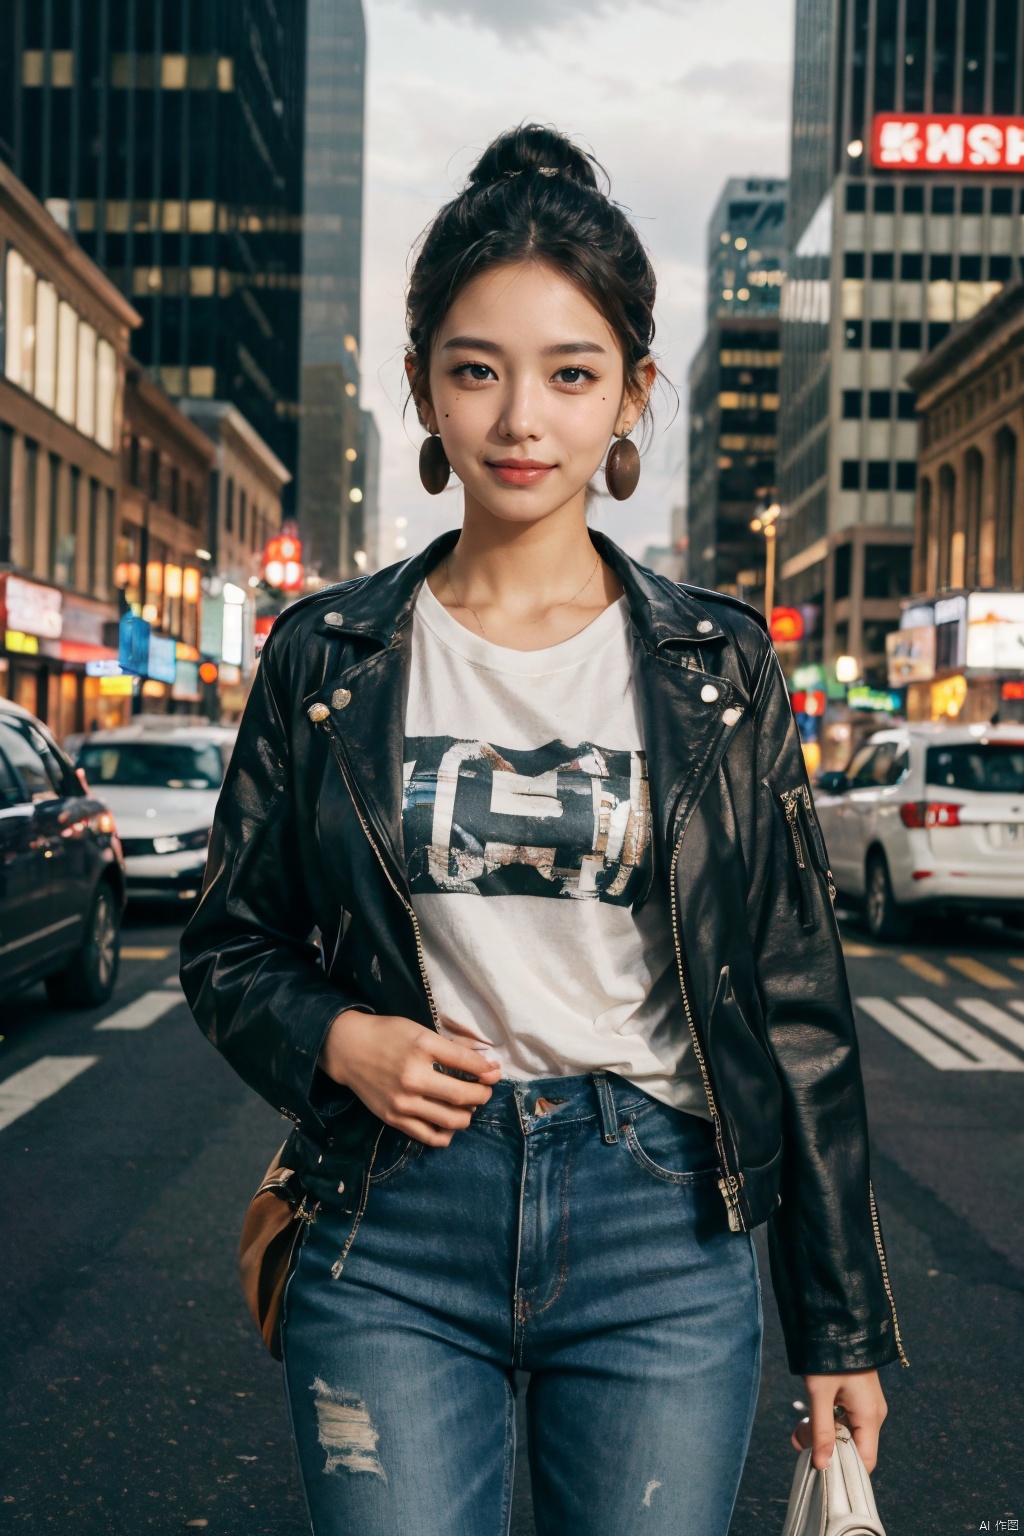 A stylish urbanite girl stands confidently at a bustling city intersection, amidst the neon glow of towering skyscrapers and the chaotic dance of traffic lights. She sports a sleek leather jacket over a graphic tee, paired with ripped jeans that hug her curves and high-top sneakers reflecting the city's vibrant hues. Her hair is tied up in a chic bun, revealing statement earrings that catch the glint of streetlights.

Her gaze is resolute and piercing, embodying an air of independence and strength as she surveys the metropolis around her. The image captures the essence of modern city life, where energy and ambition intertwine. This scene is reminiscent of the dynamic, cinematic portraits found in the work of contemporary photographers like Tyler Mitchell or Petra Collins.

Render this striking figure in 4K resolution, using bold, contrasting colors to accentuate the vibrancy of the cityscape and her commanding presence within it. The composition highlights her poise and determination, standing out from the blur of moving cars and busy pedestrians, symbolizing the spirit of the empowered woman navigating the urban jungle.